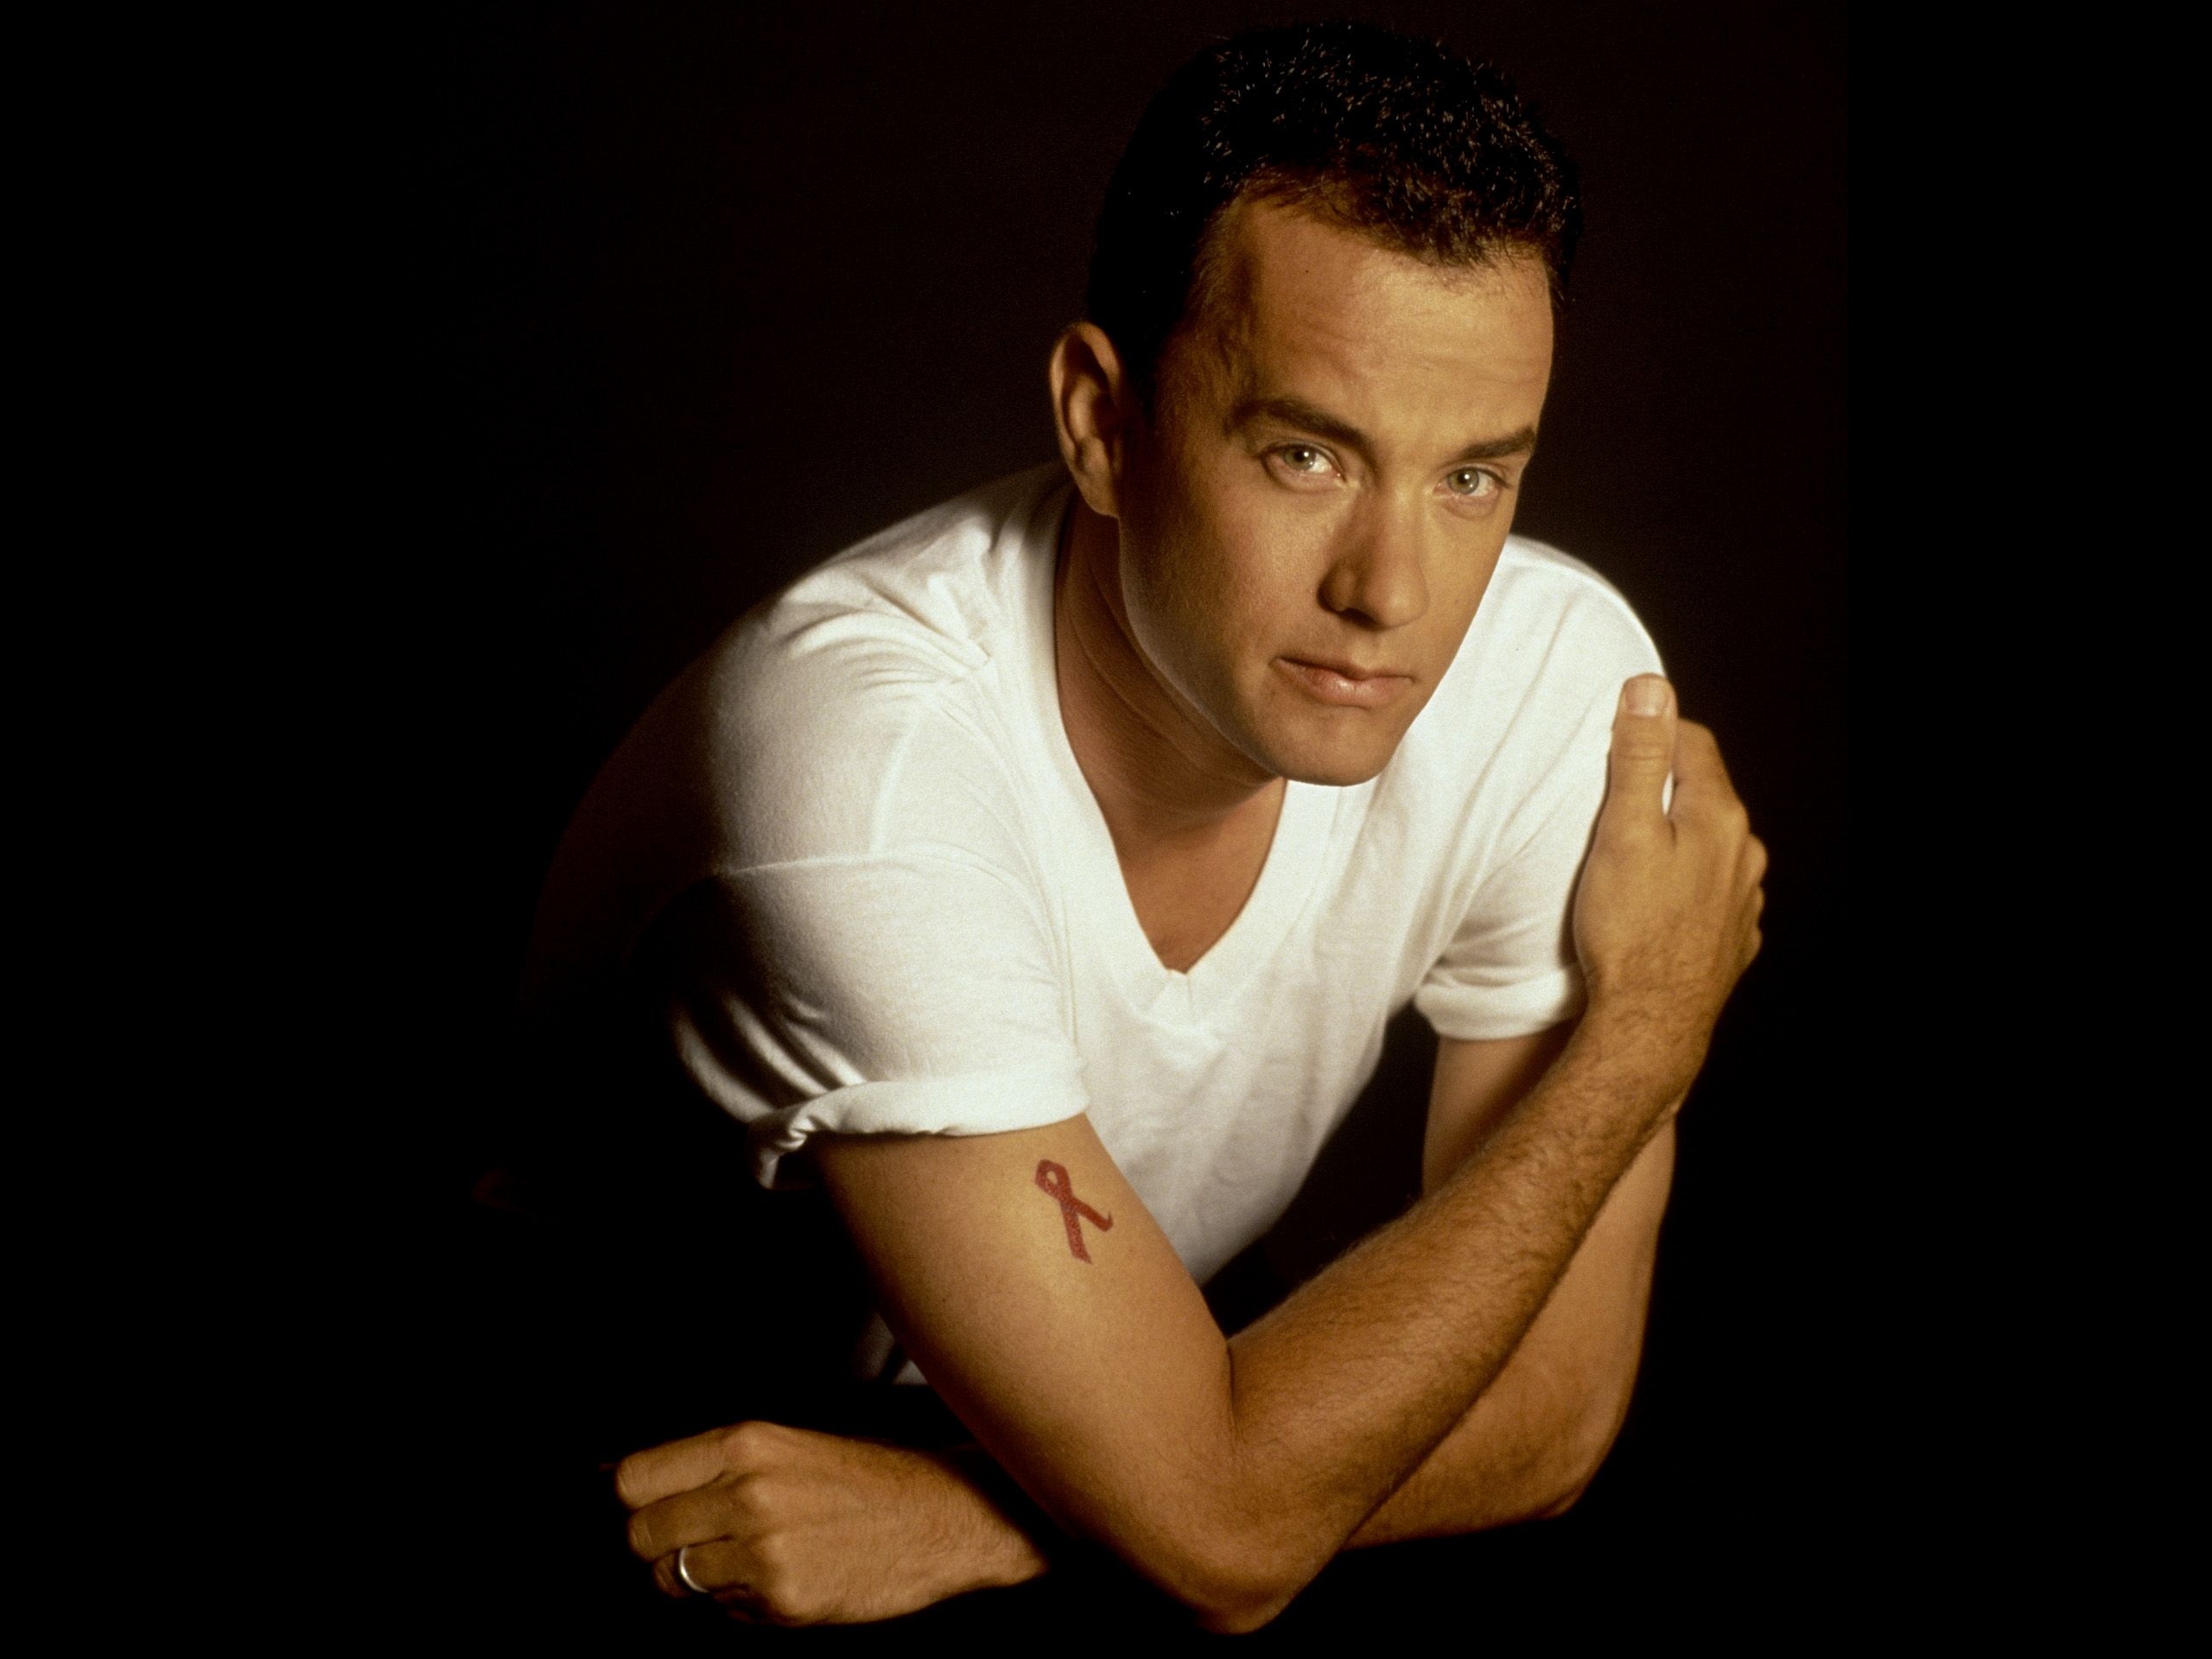 Turner and Hooch: Tom Hanks, Hollywood actor, Known for both his comedic and dramatic roles. 2560x1920 HD Wallpaper.